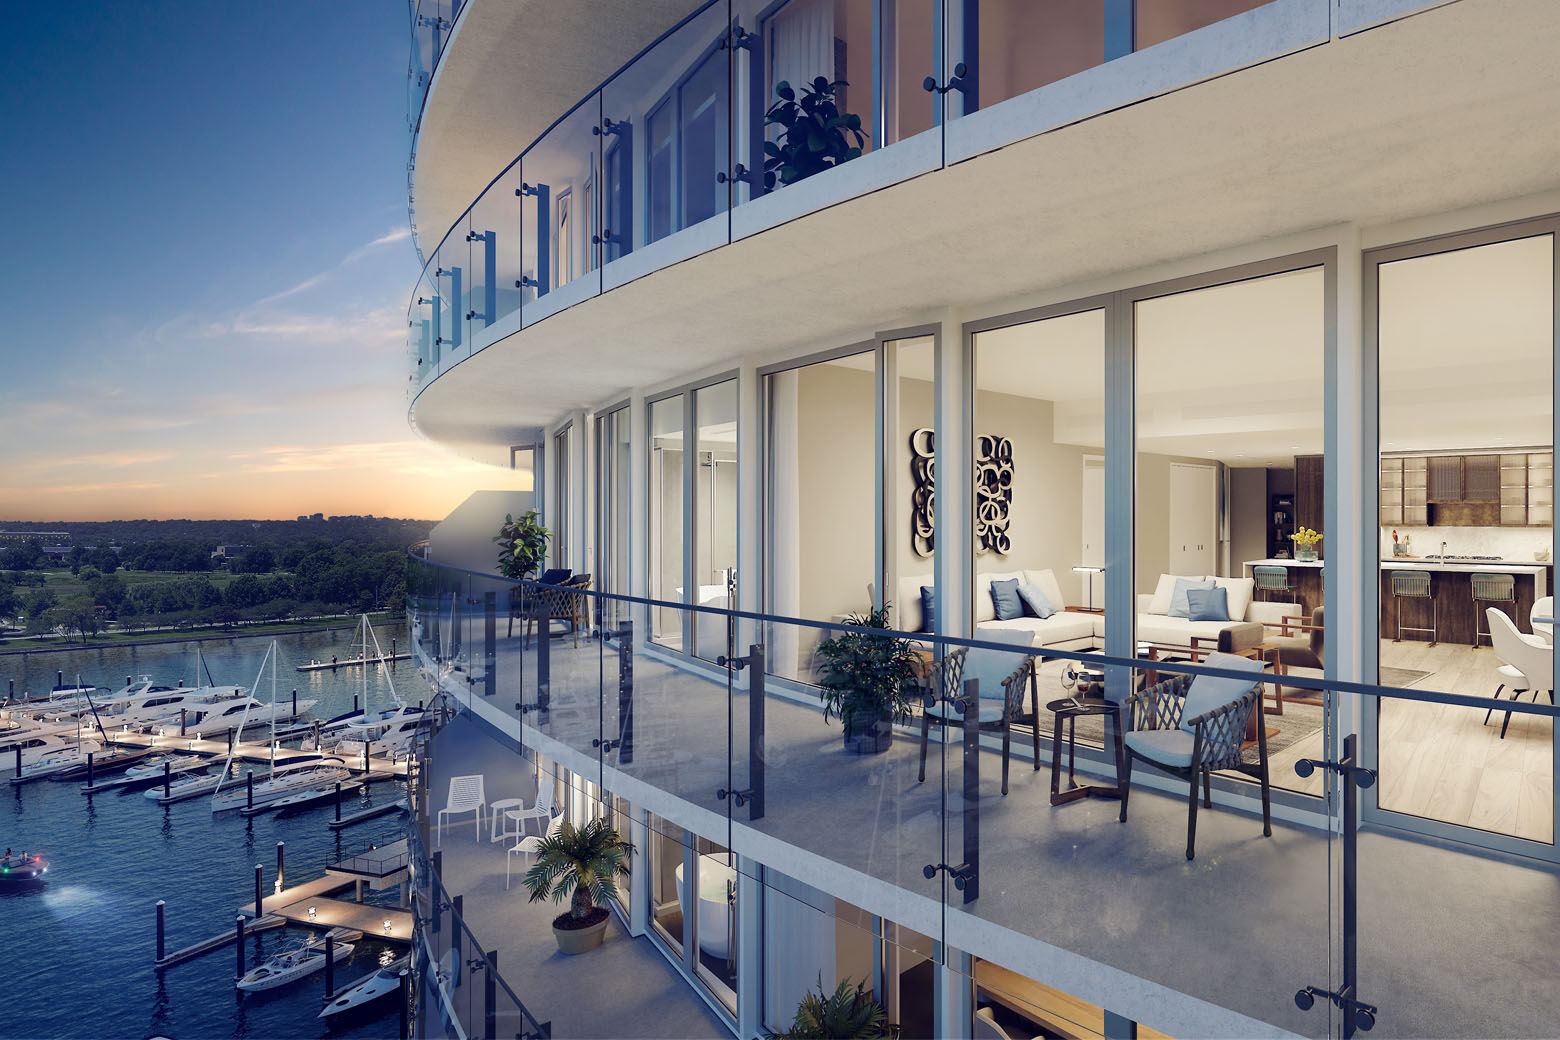 The condos range in size from 700-square-foot one-bedrooms, to 6,000-square-foot four-bedrooms. (Courtesy Hoffman-Madison Waterfront)